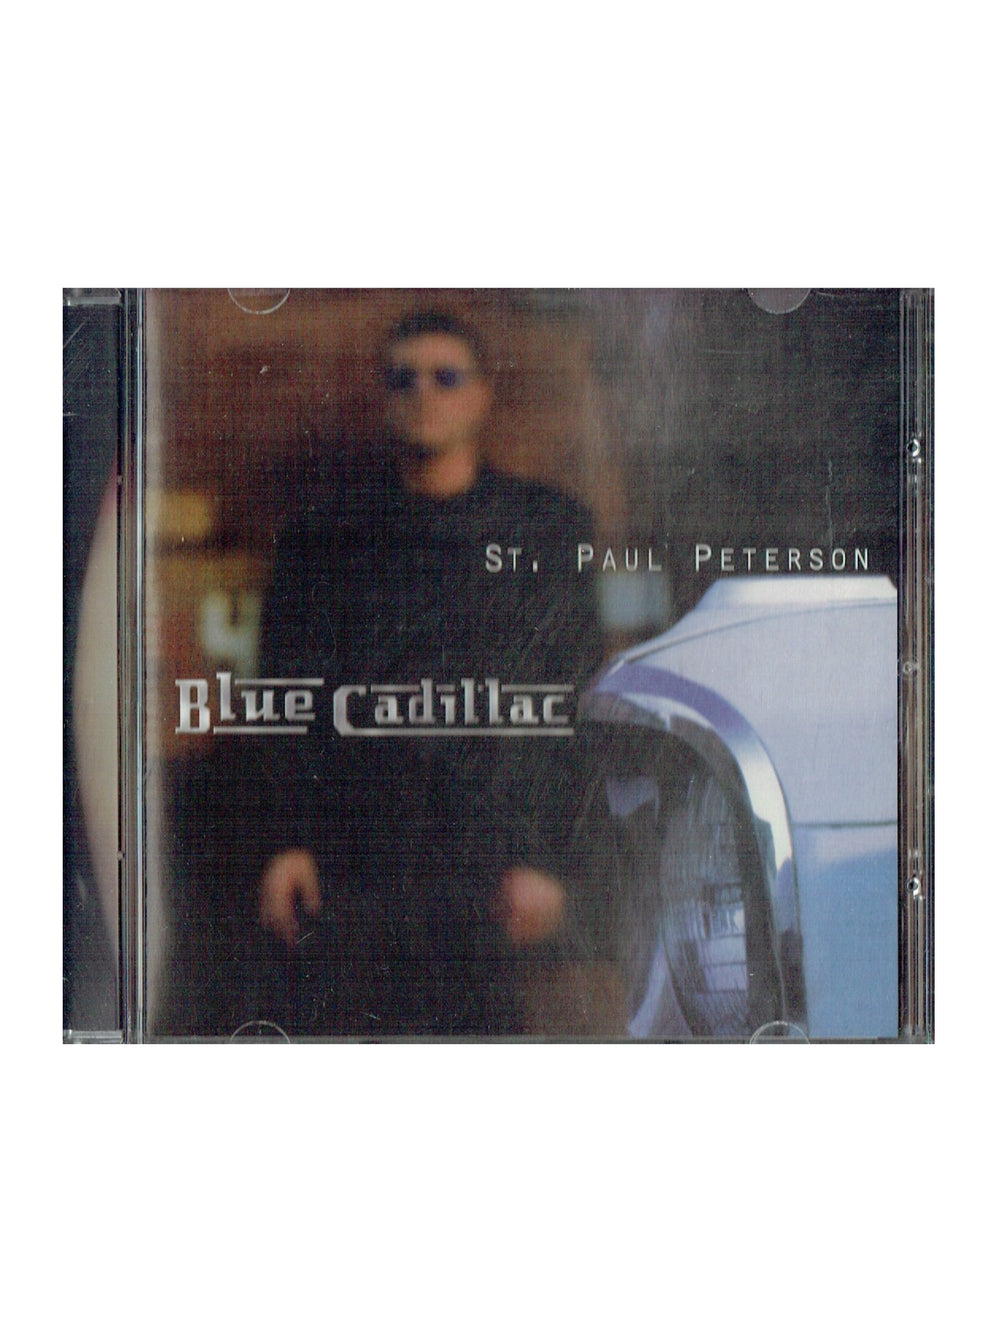 Prince – St. Paul Peterson Blue Cadillac CD Album US Preloved NM : 1996